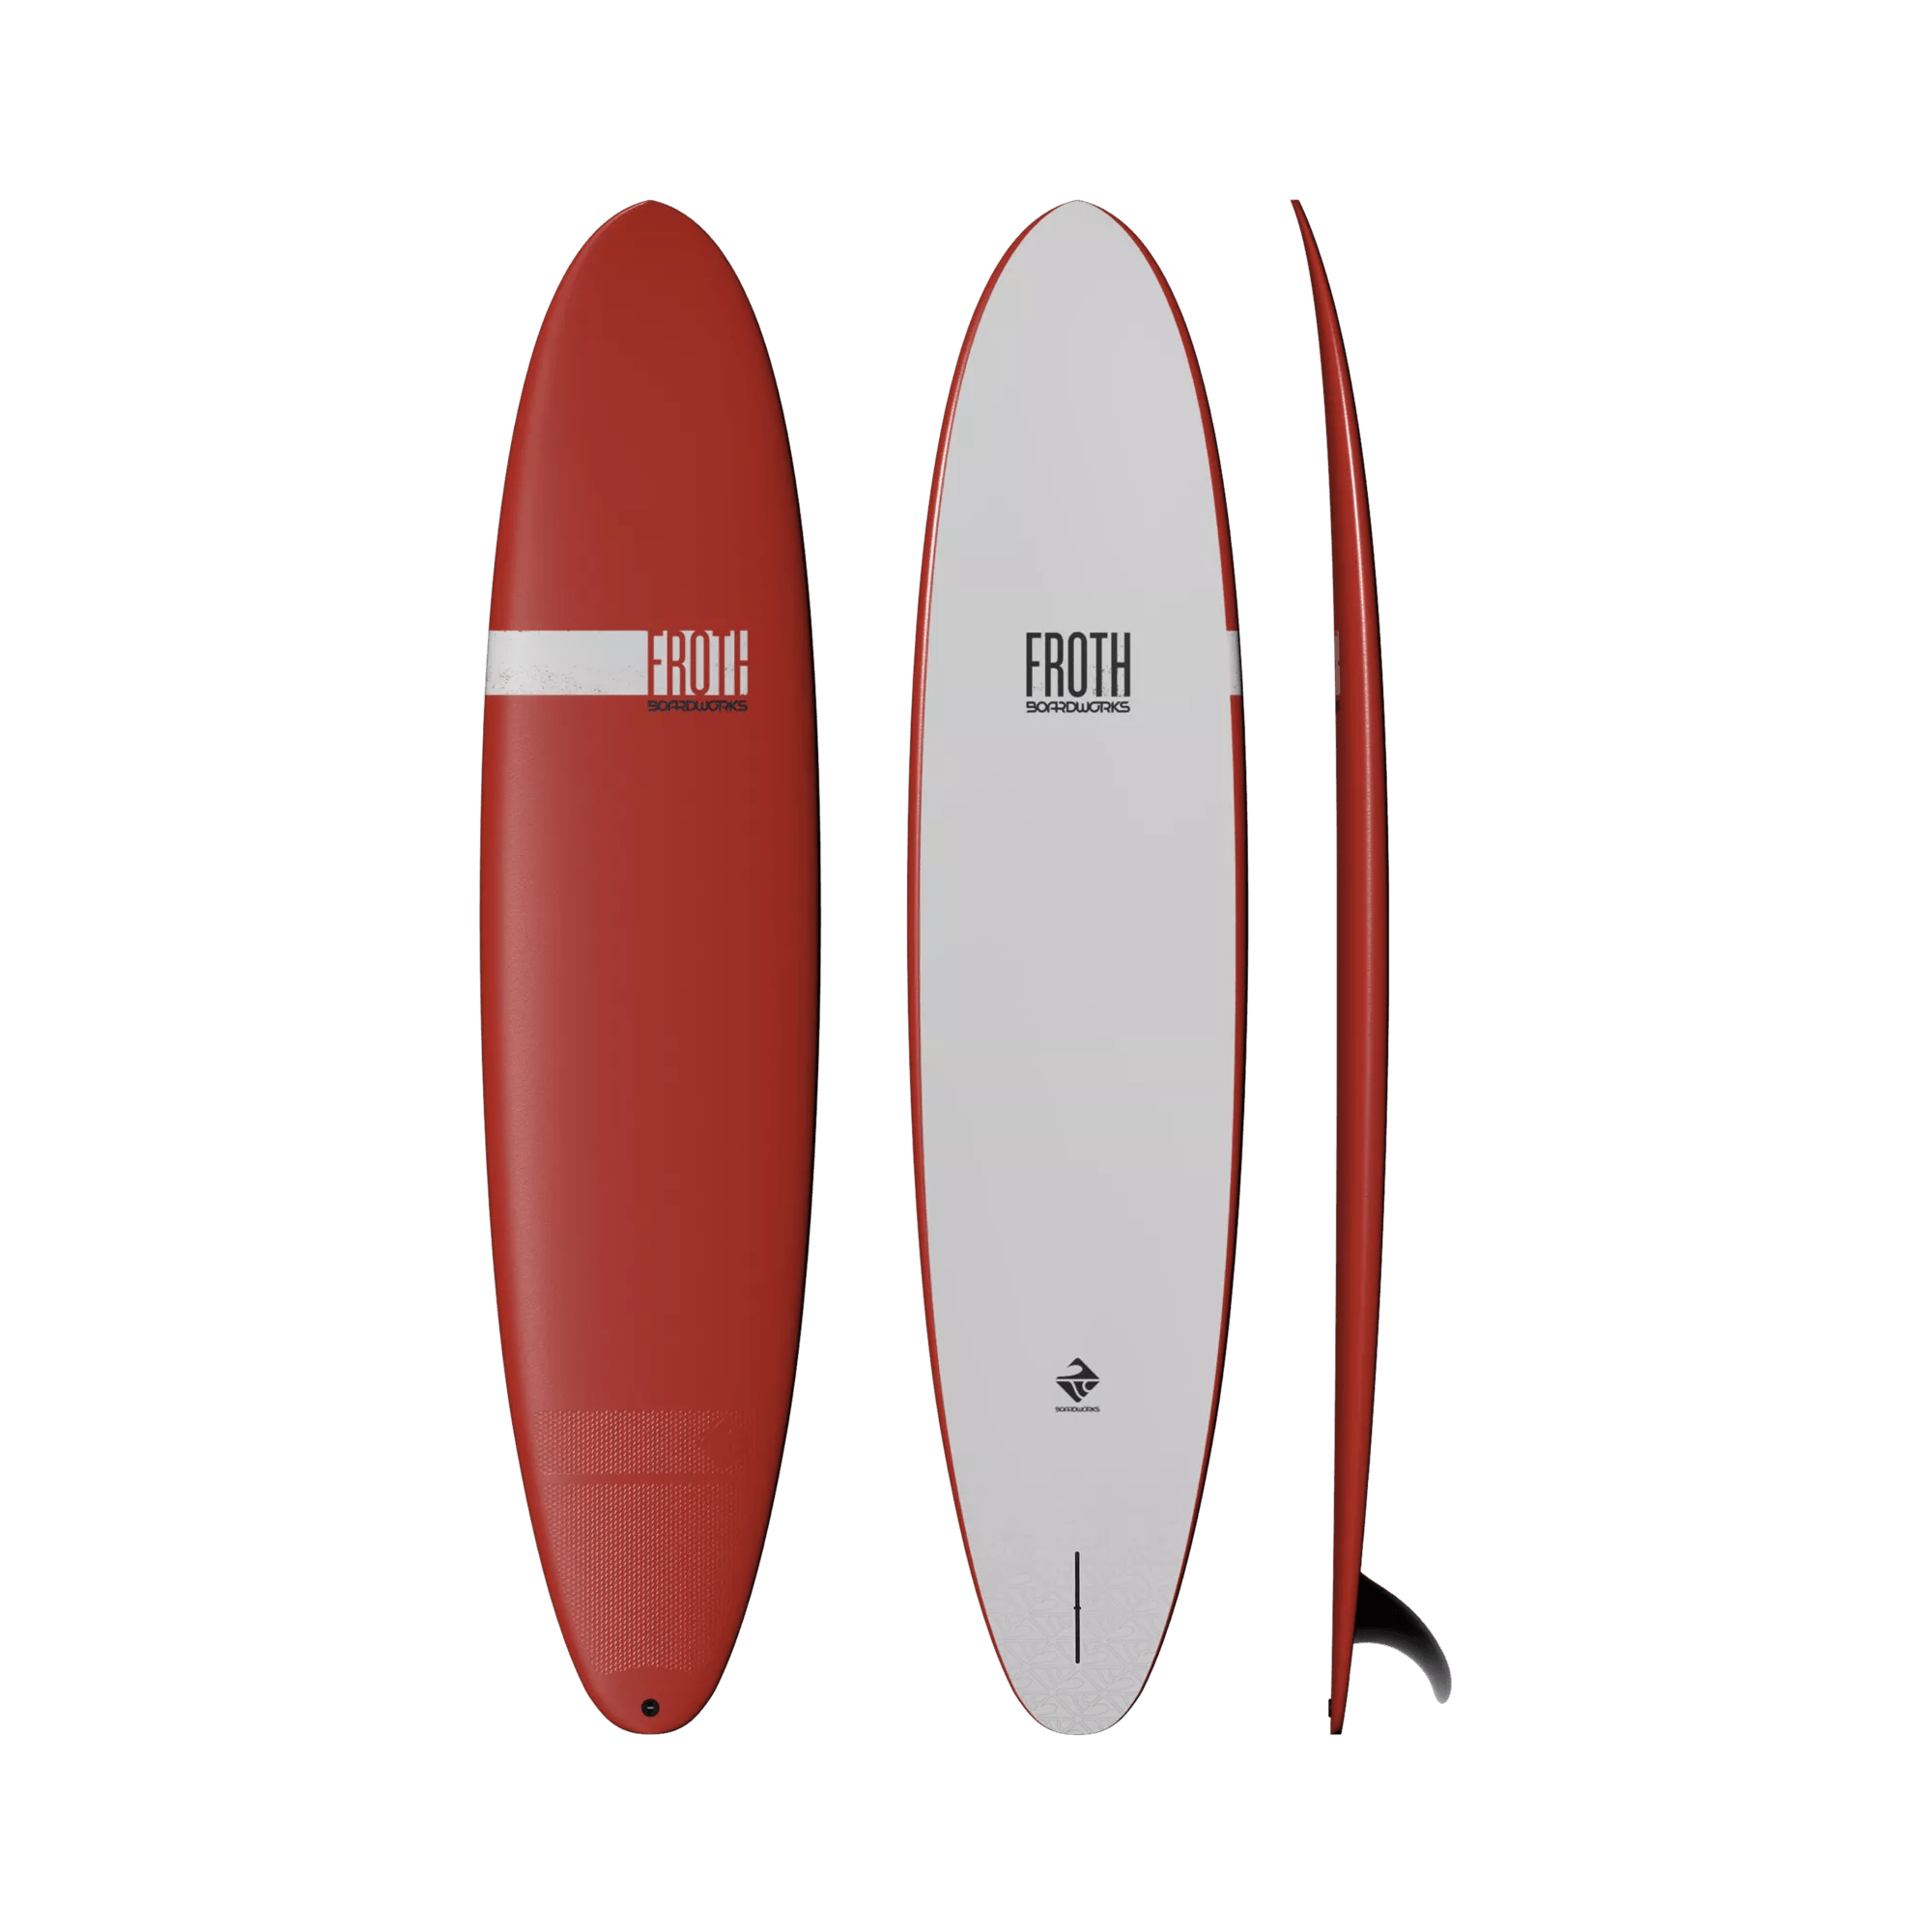 BOARDWORKS - Froth 9' Longboard - Red - 4430329510 - TOP 